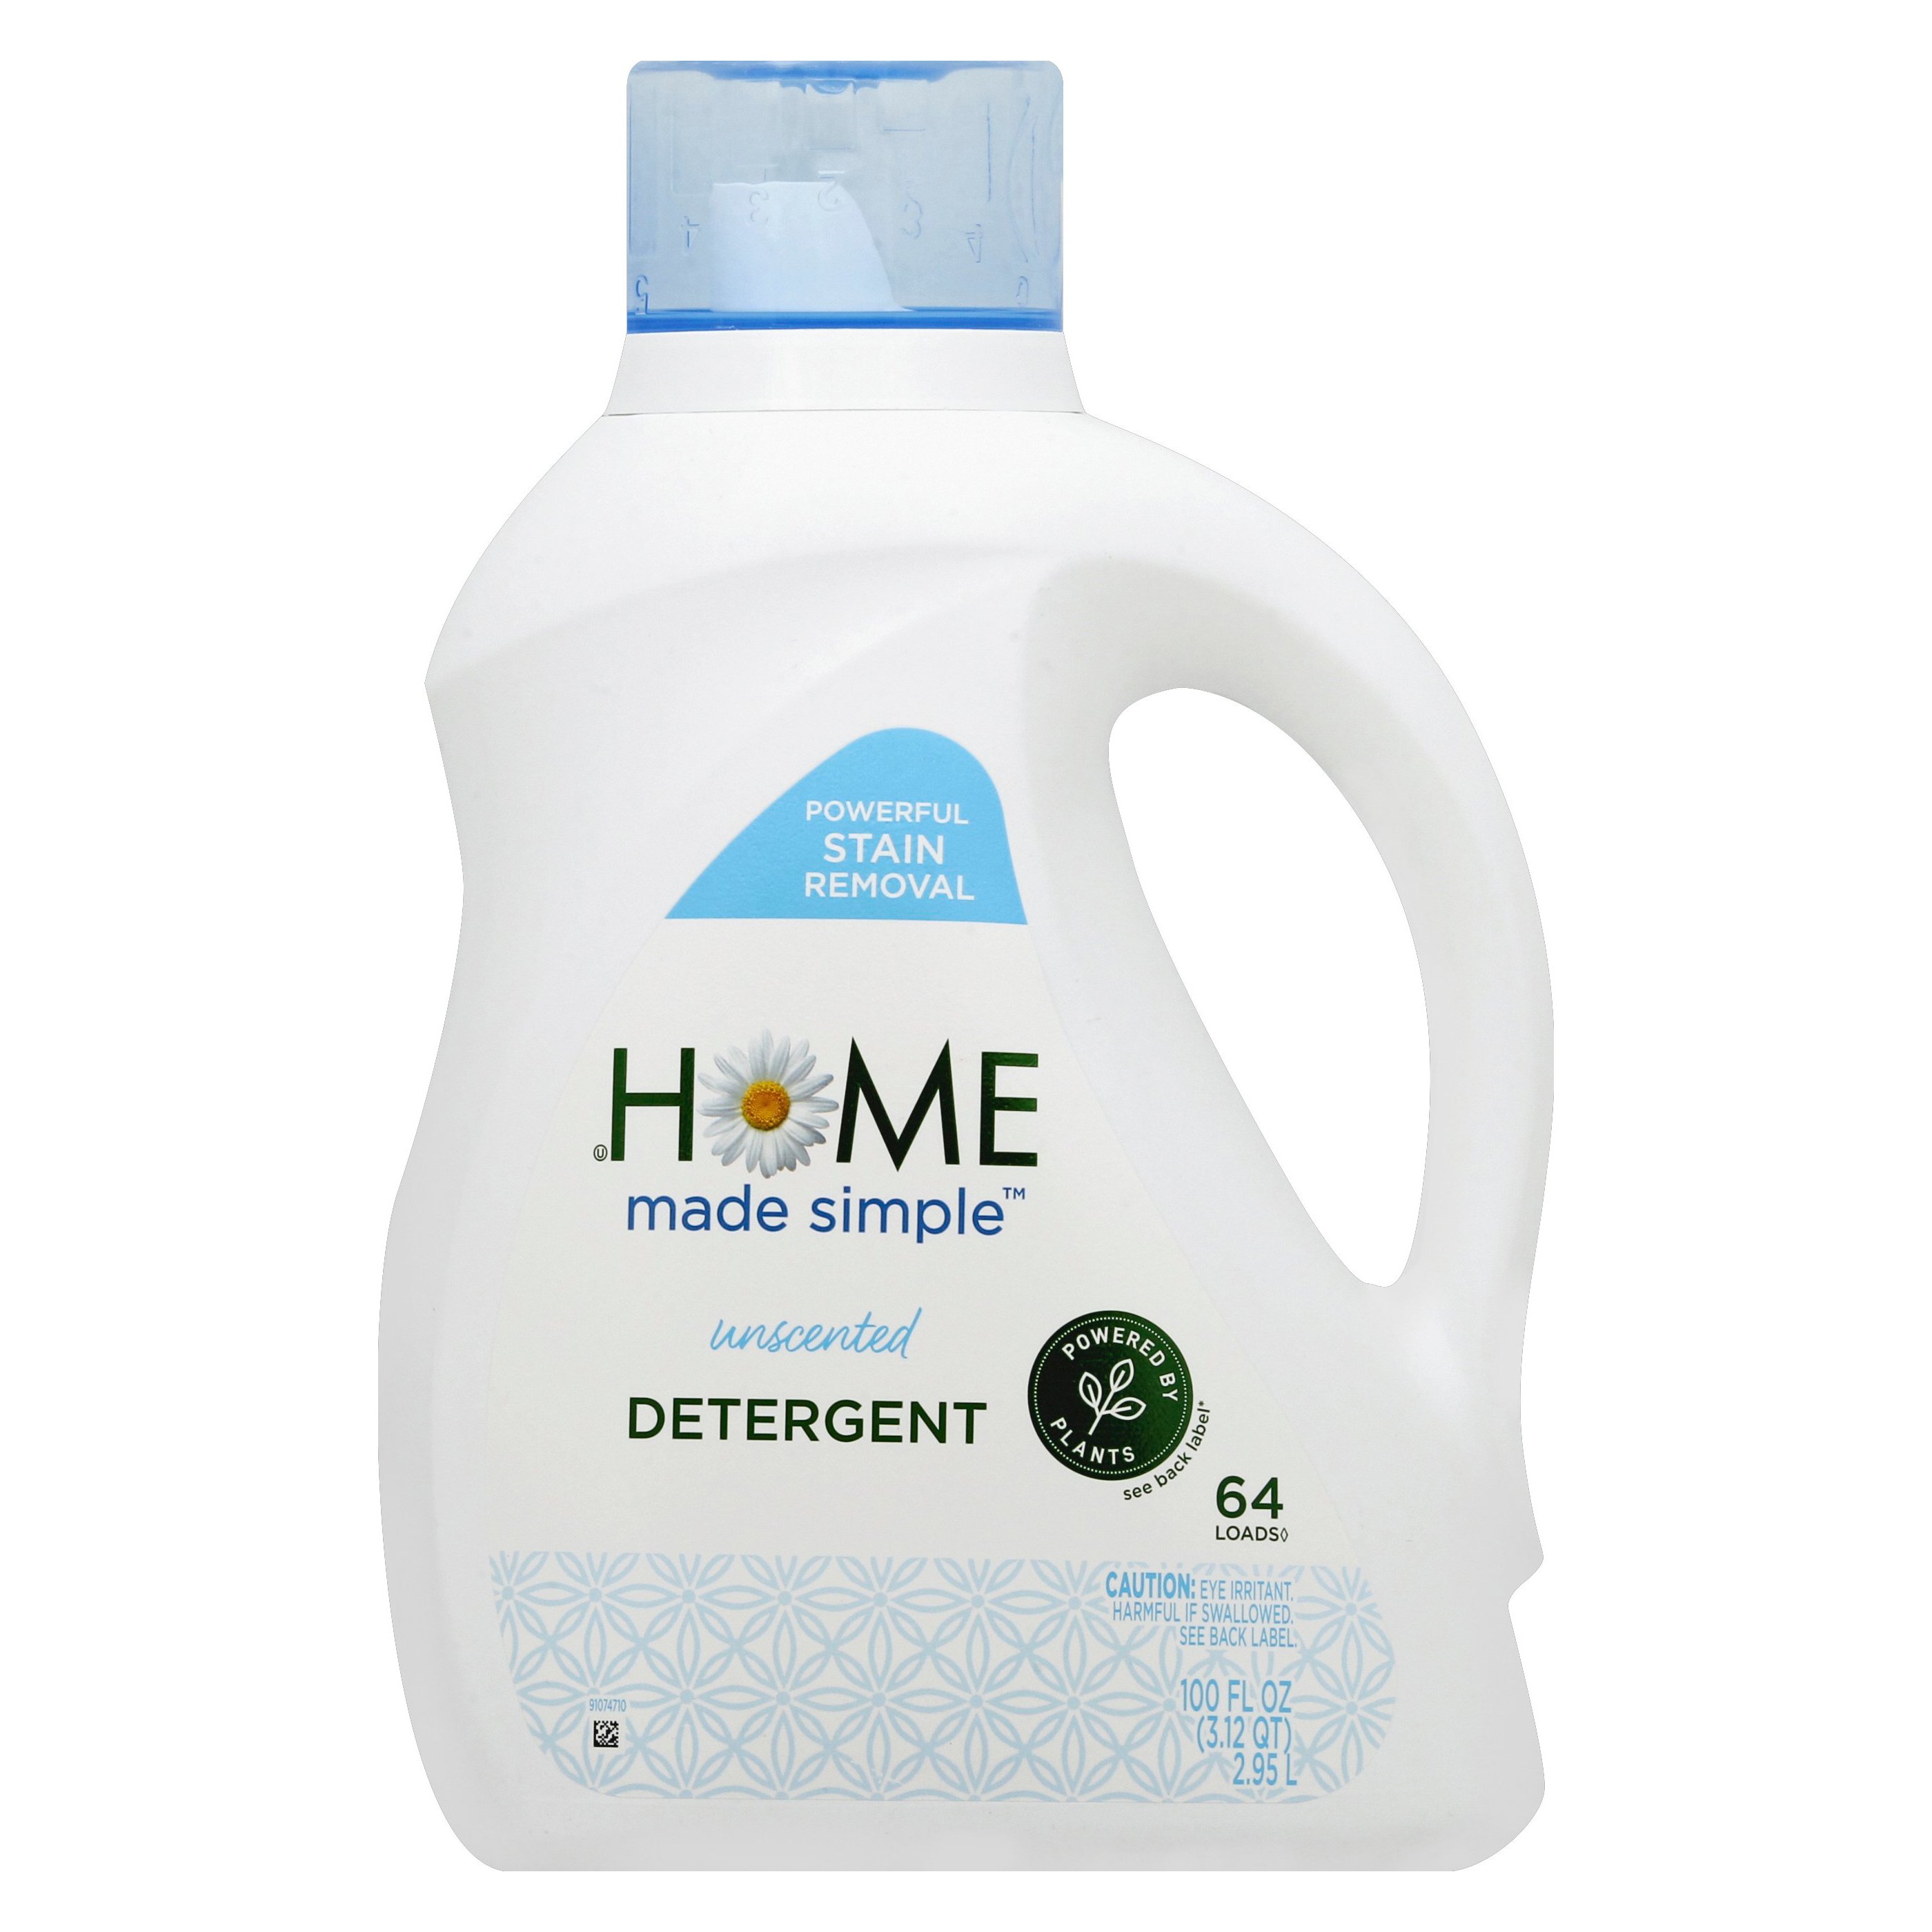 Home Laundry Detergent